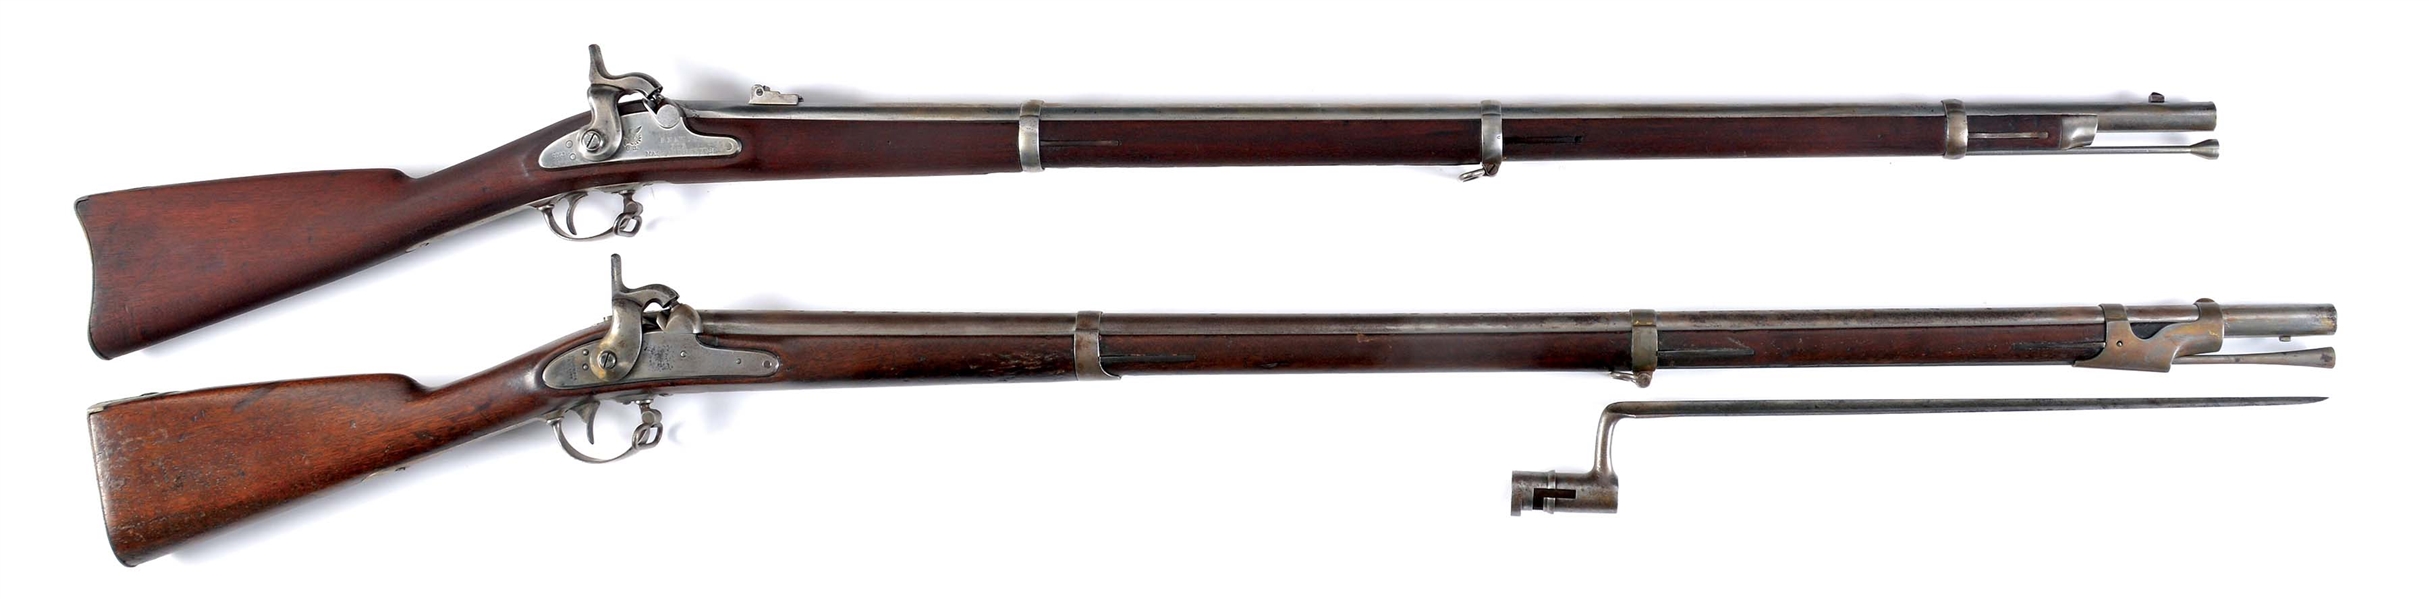 (A) LOT OF 2 CIVIL WAR PERCUSSION MUSKETS: S.N. & W.T.C CONTRACT 1861 & MODEL 1842 WITH PALMETTO MARKED LOCK.